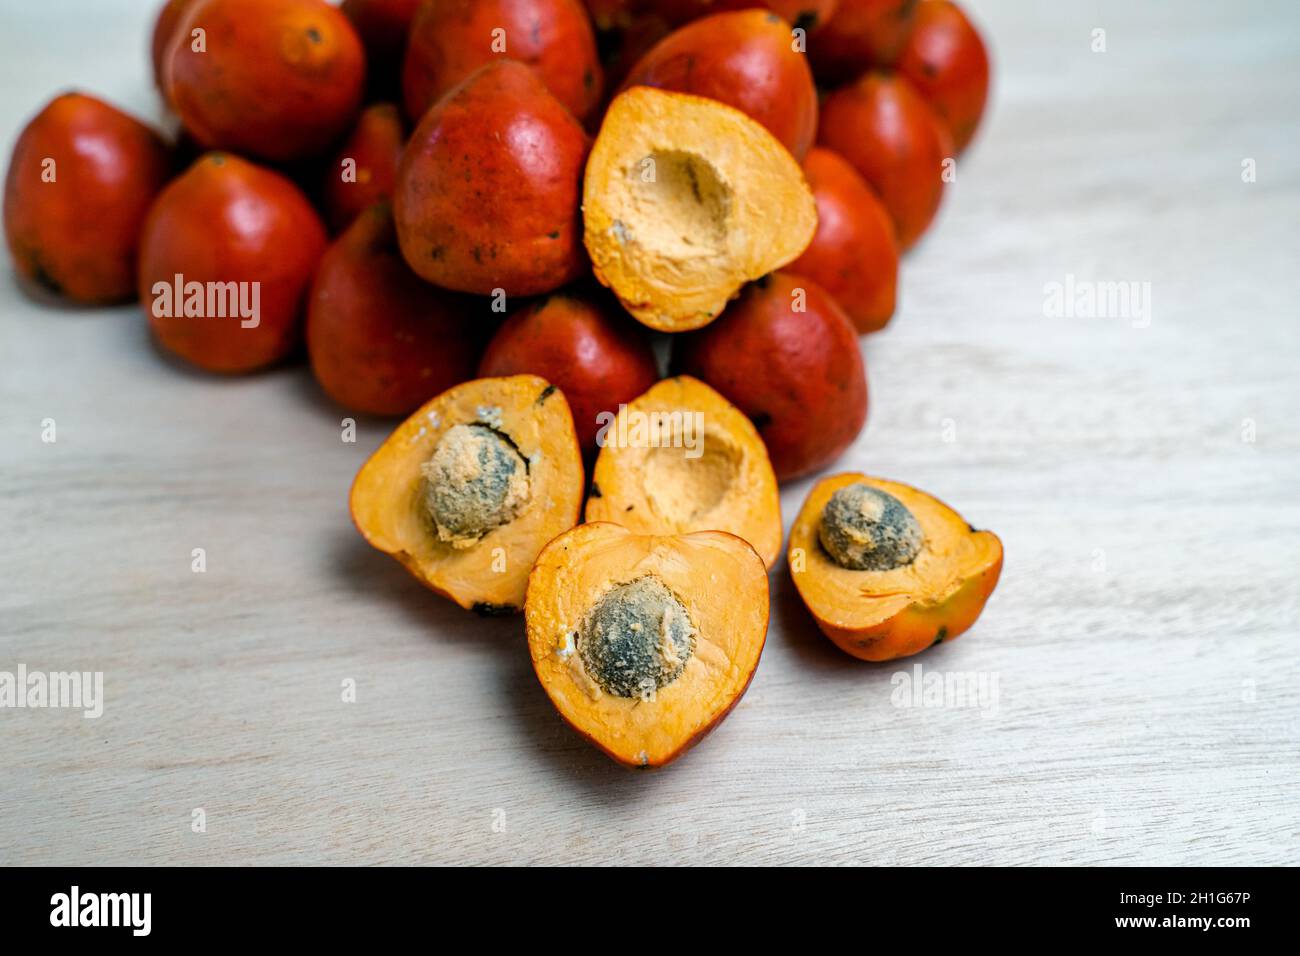 Fruits of chontaduro on the wooden surface Stock Photo